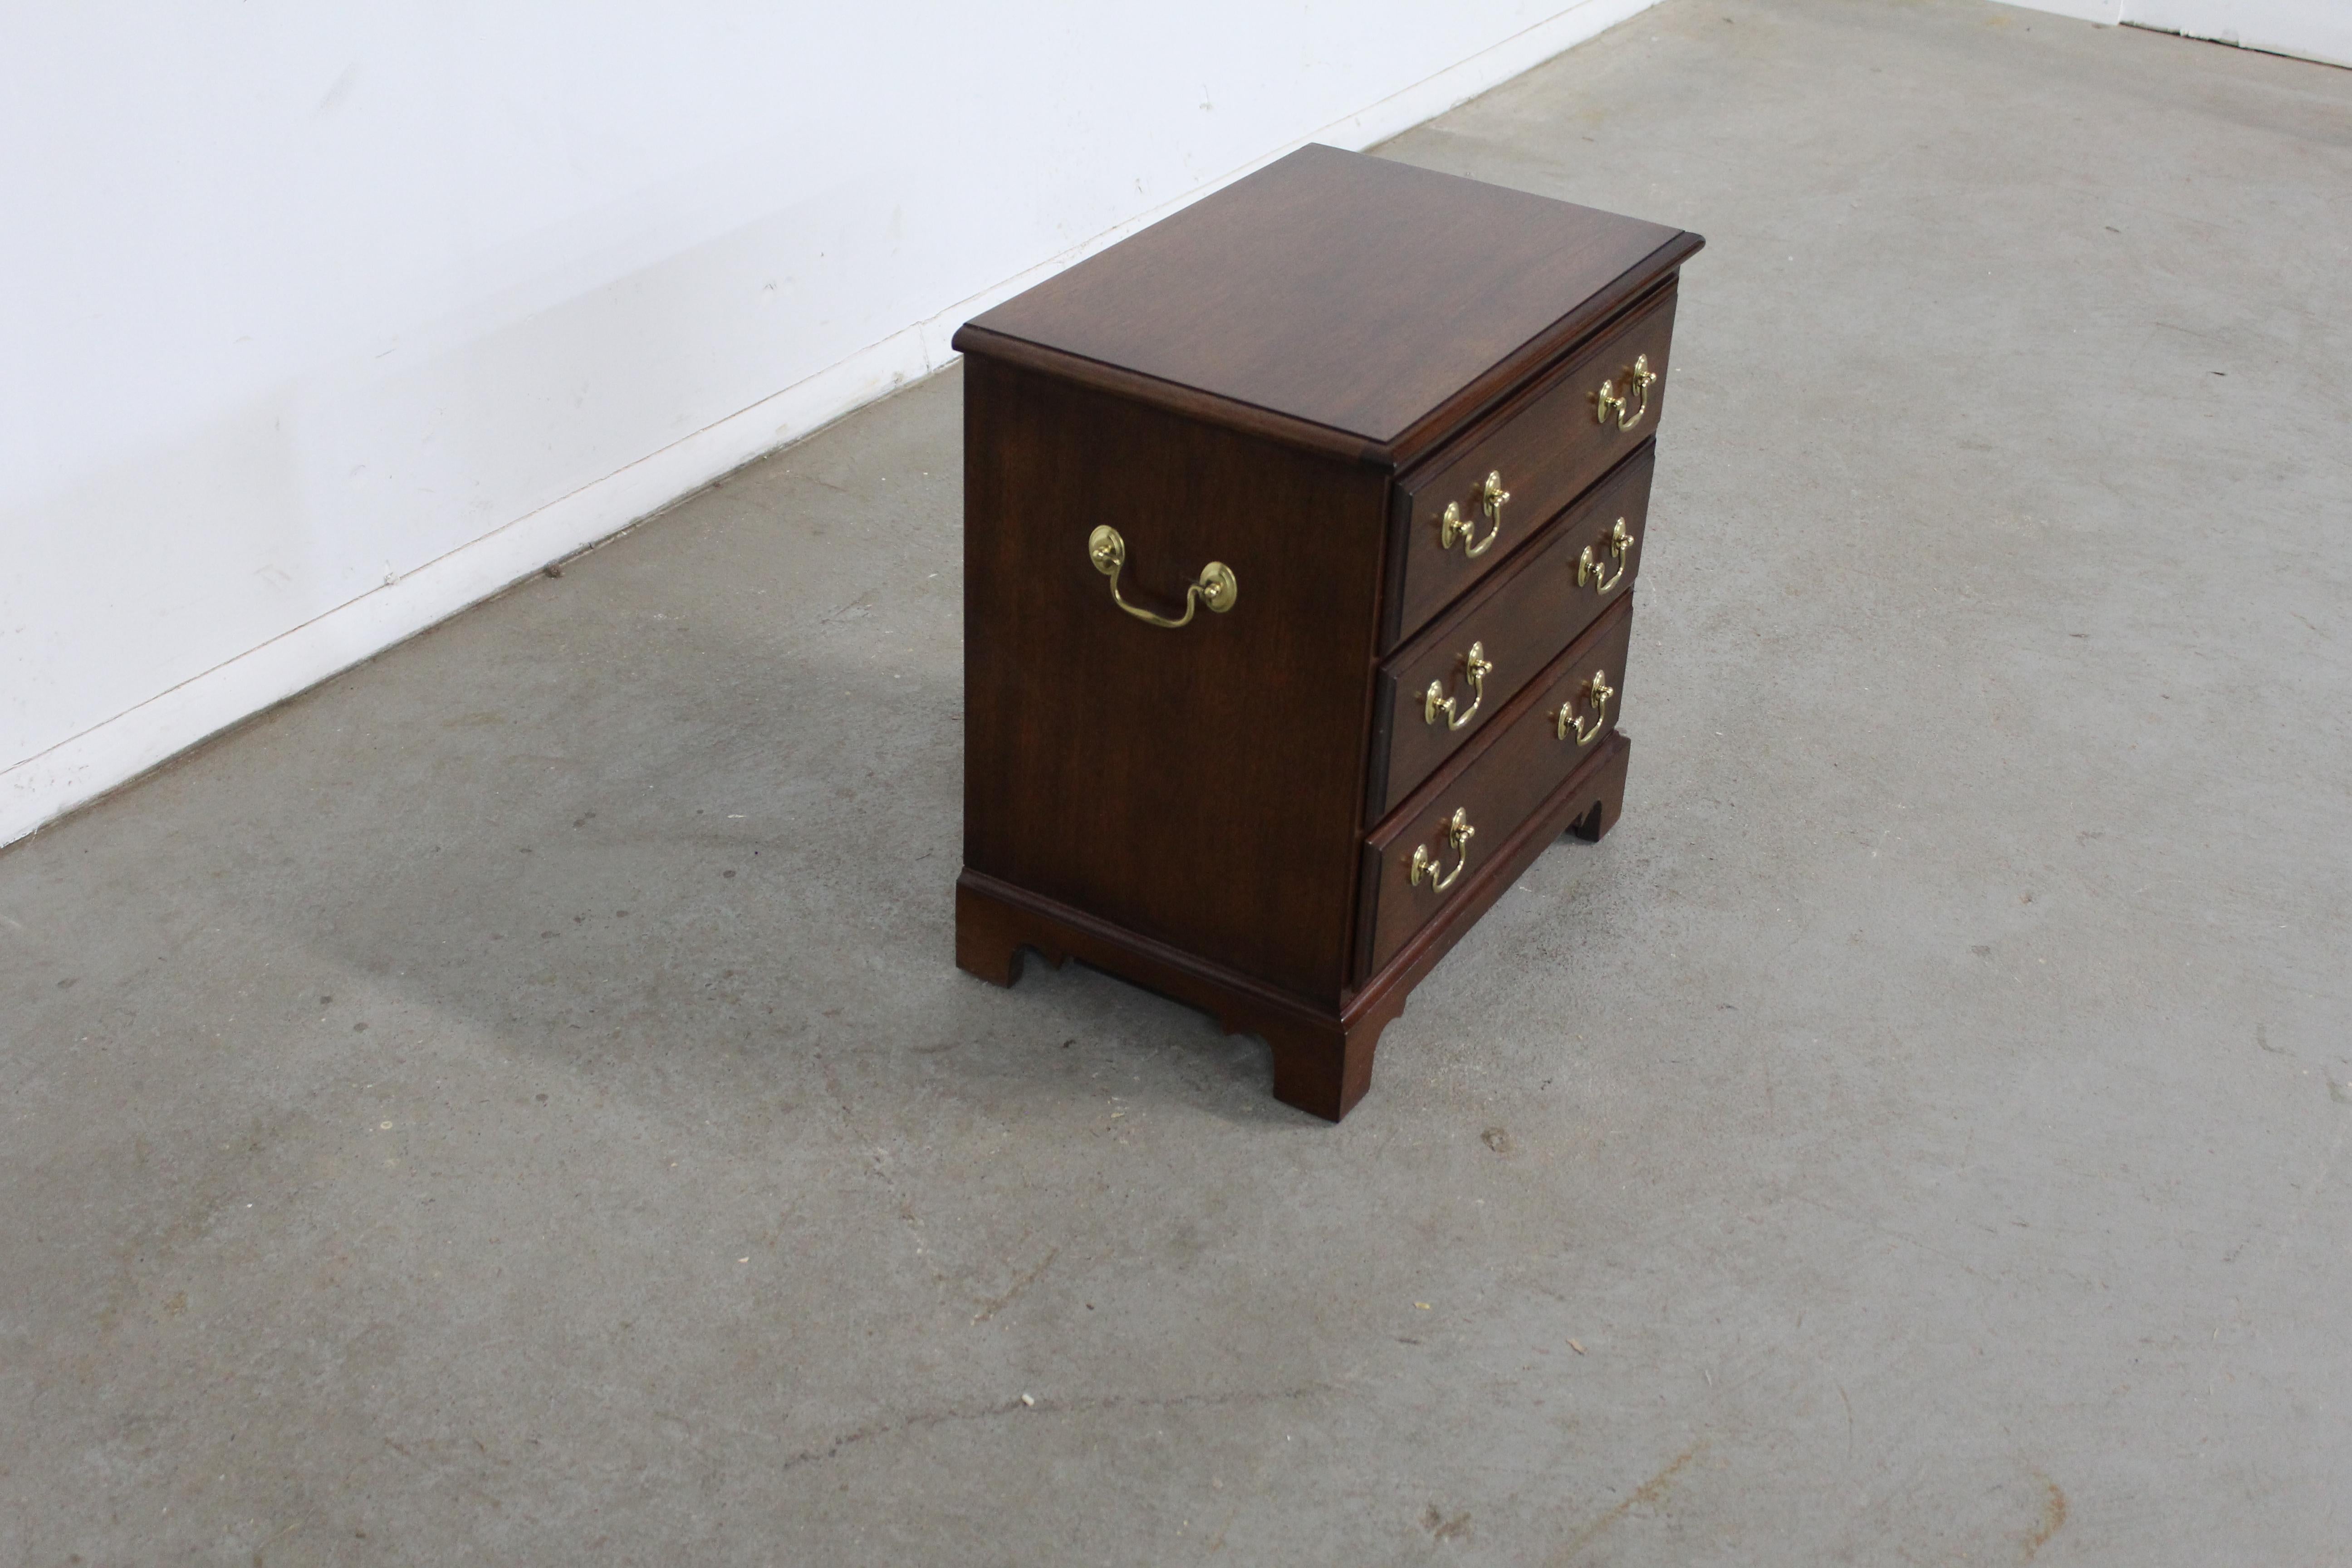 Vintage Georgian Mahogany nightstand/3 drawer silver chest
Offered is a vintage Georgian Mahogany nightstand/3 drawer silver chest. We believe it to be by Councill or Harden, but are unsure. The piece shows very minor scratches and age wear. It's